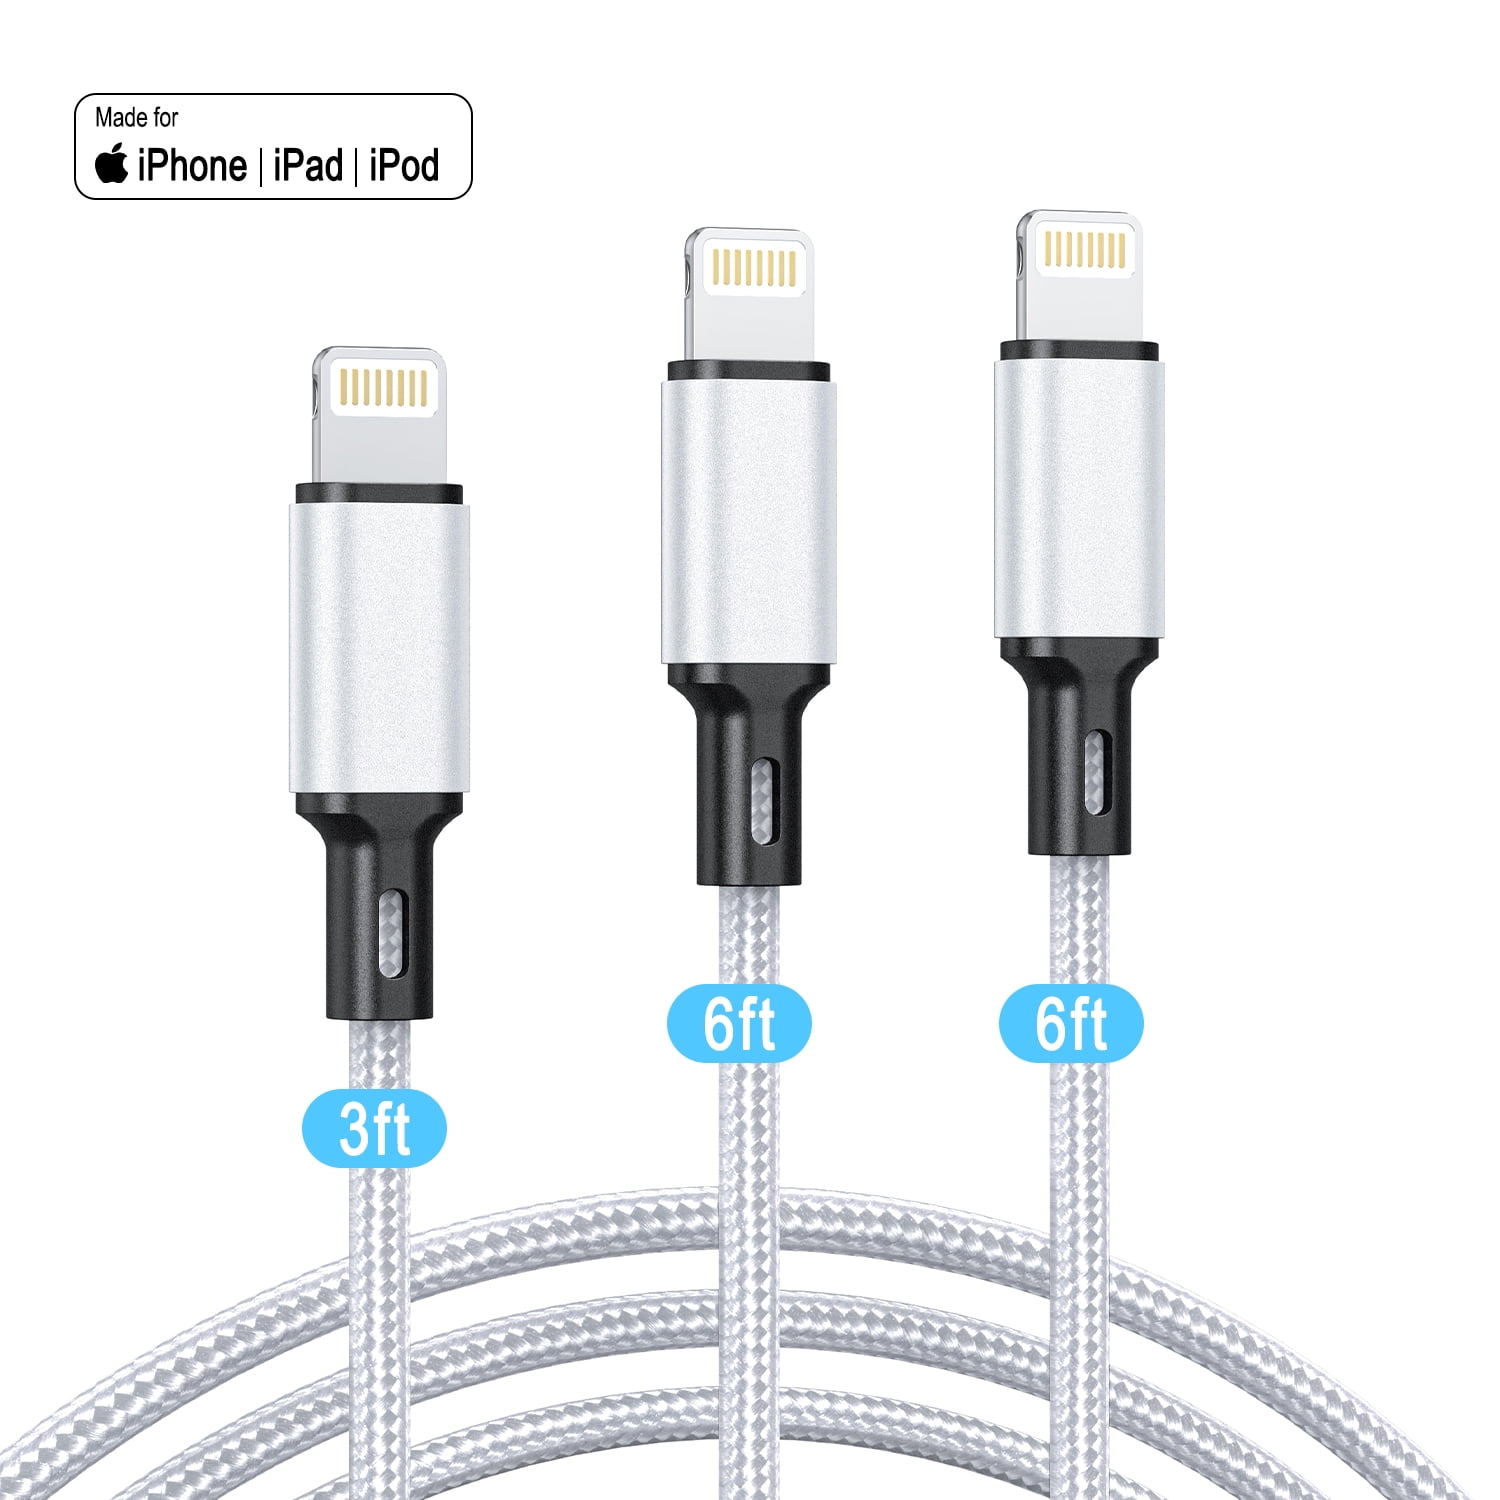 3Pack [Apple MFi Certified] iPhone Charger Cables (3/6/6ft), Long Lightning  Cable Nylon Fast iPhone Charging Cord Compatible for iPhone 13/13  pro/12/11/11 Pro/X/Xs Max/XR/ iPad Air 2/Mini Airpods 